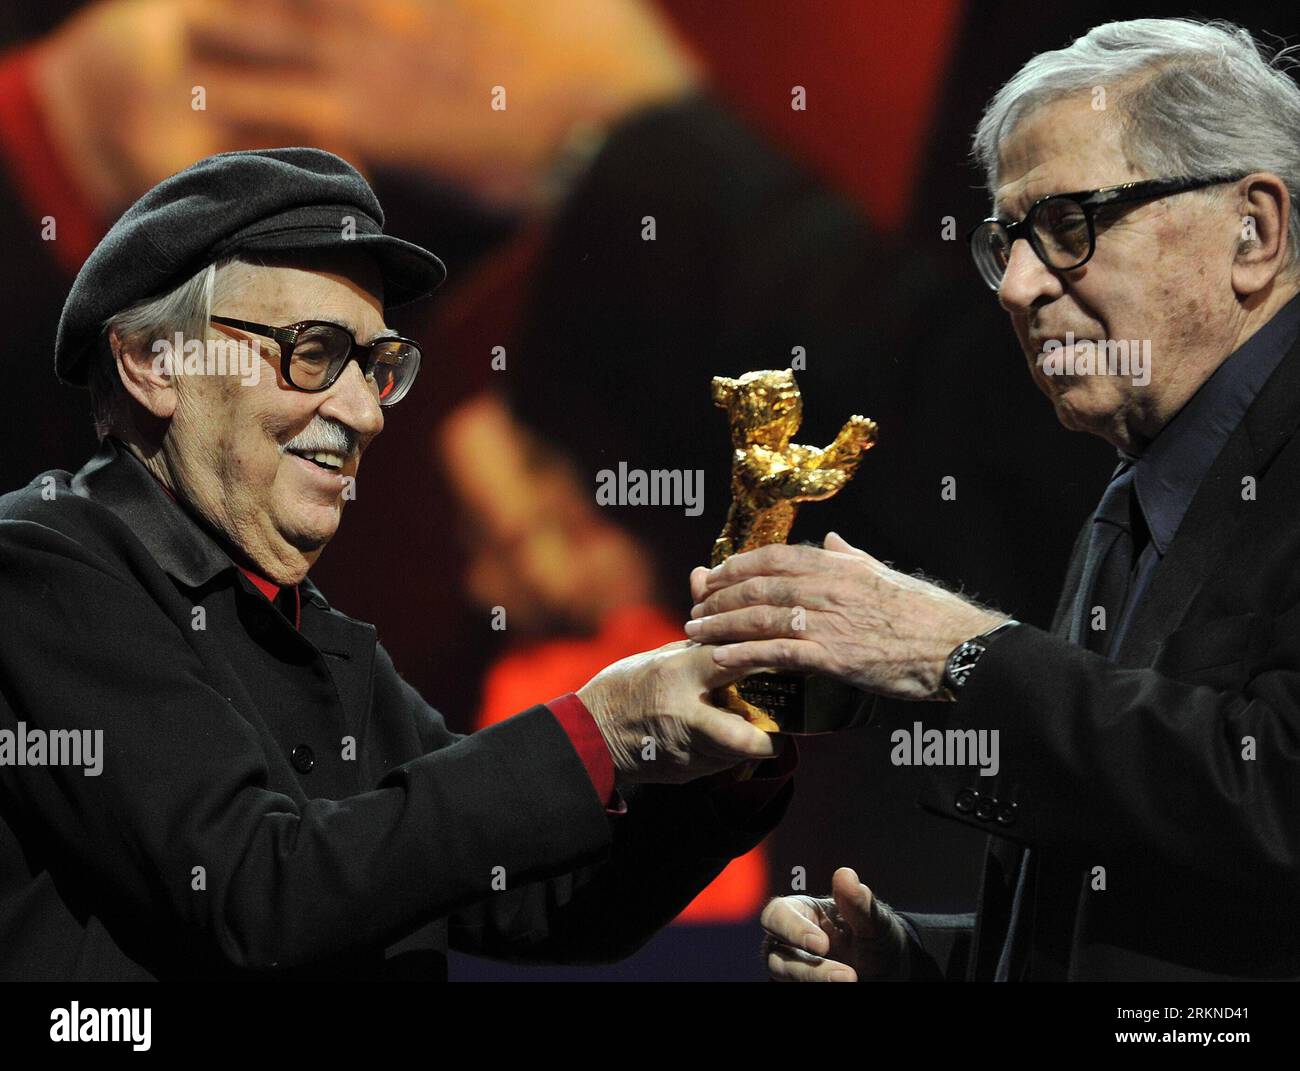 (120218) -- BERLIN, Feb. 18, 2012 (Xinhua) -- Italian directors Paolo Taviani (R) and Vittorio Taviani for the movie Caesare Deve Morire ( Caesar Must Die ) hold the Golden Bear award for the best film during the awards ceremony at the 62nd Berlinale film festival in Berlin, capital of Germany, on Feb. 18, 2012. (Xinhua/Ma Ning) (yy) GERMANY-BERLINALE FILM FESTIVAL-AWARDS CEREMONY PUBLICATIONxNOTxINxCHN Stock Photo